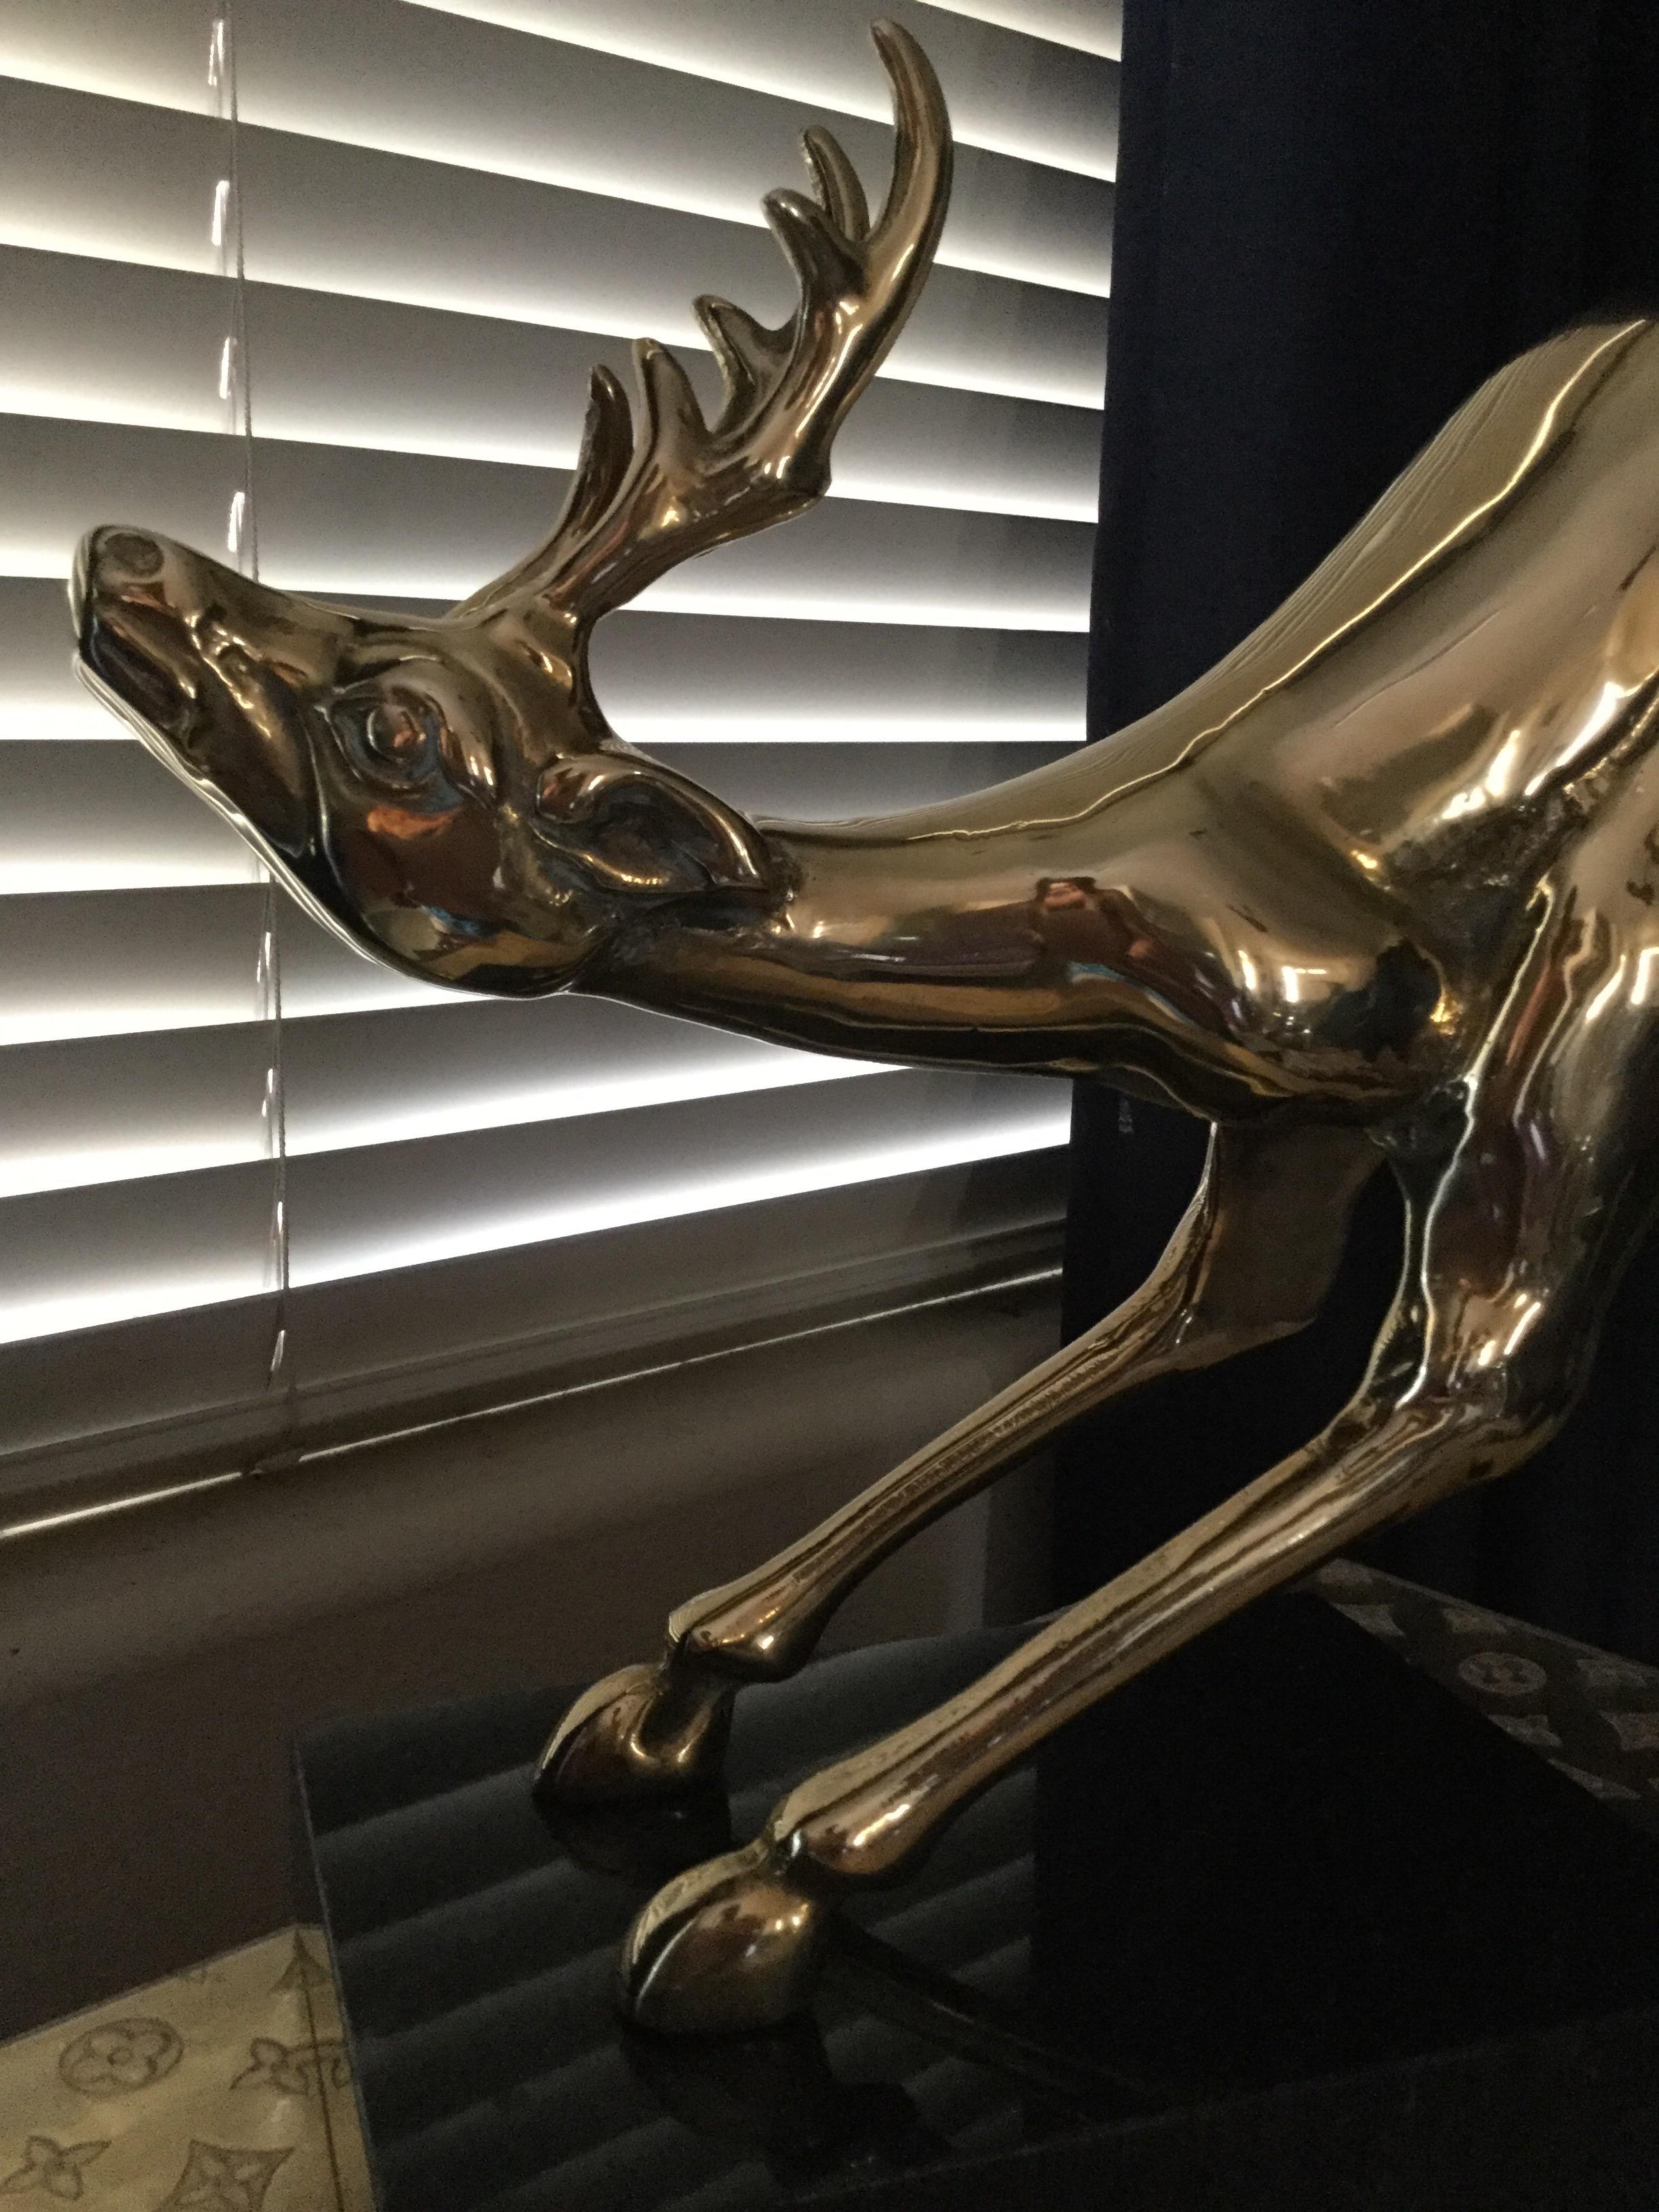 A rare vintage brass animal statue from 1980s. Newly polished. Jumping reindeer appears to be in flight attached to the marble base.